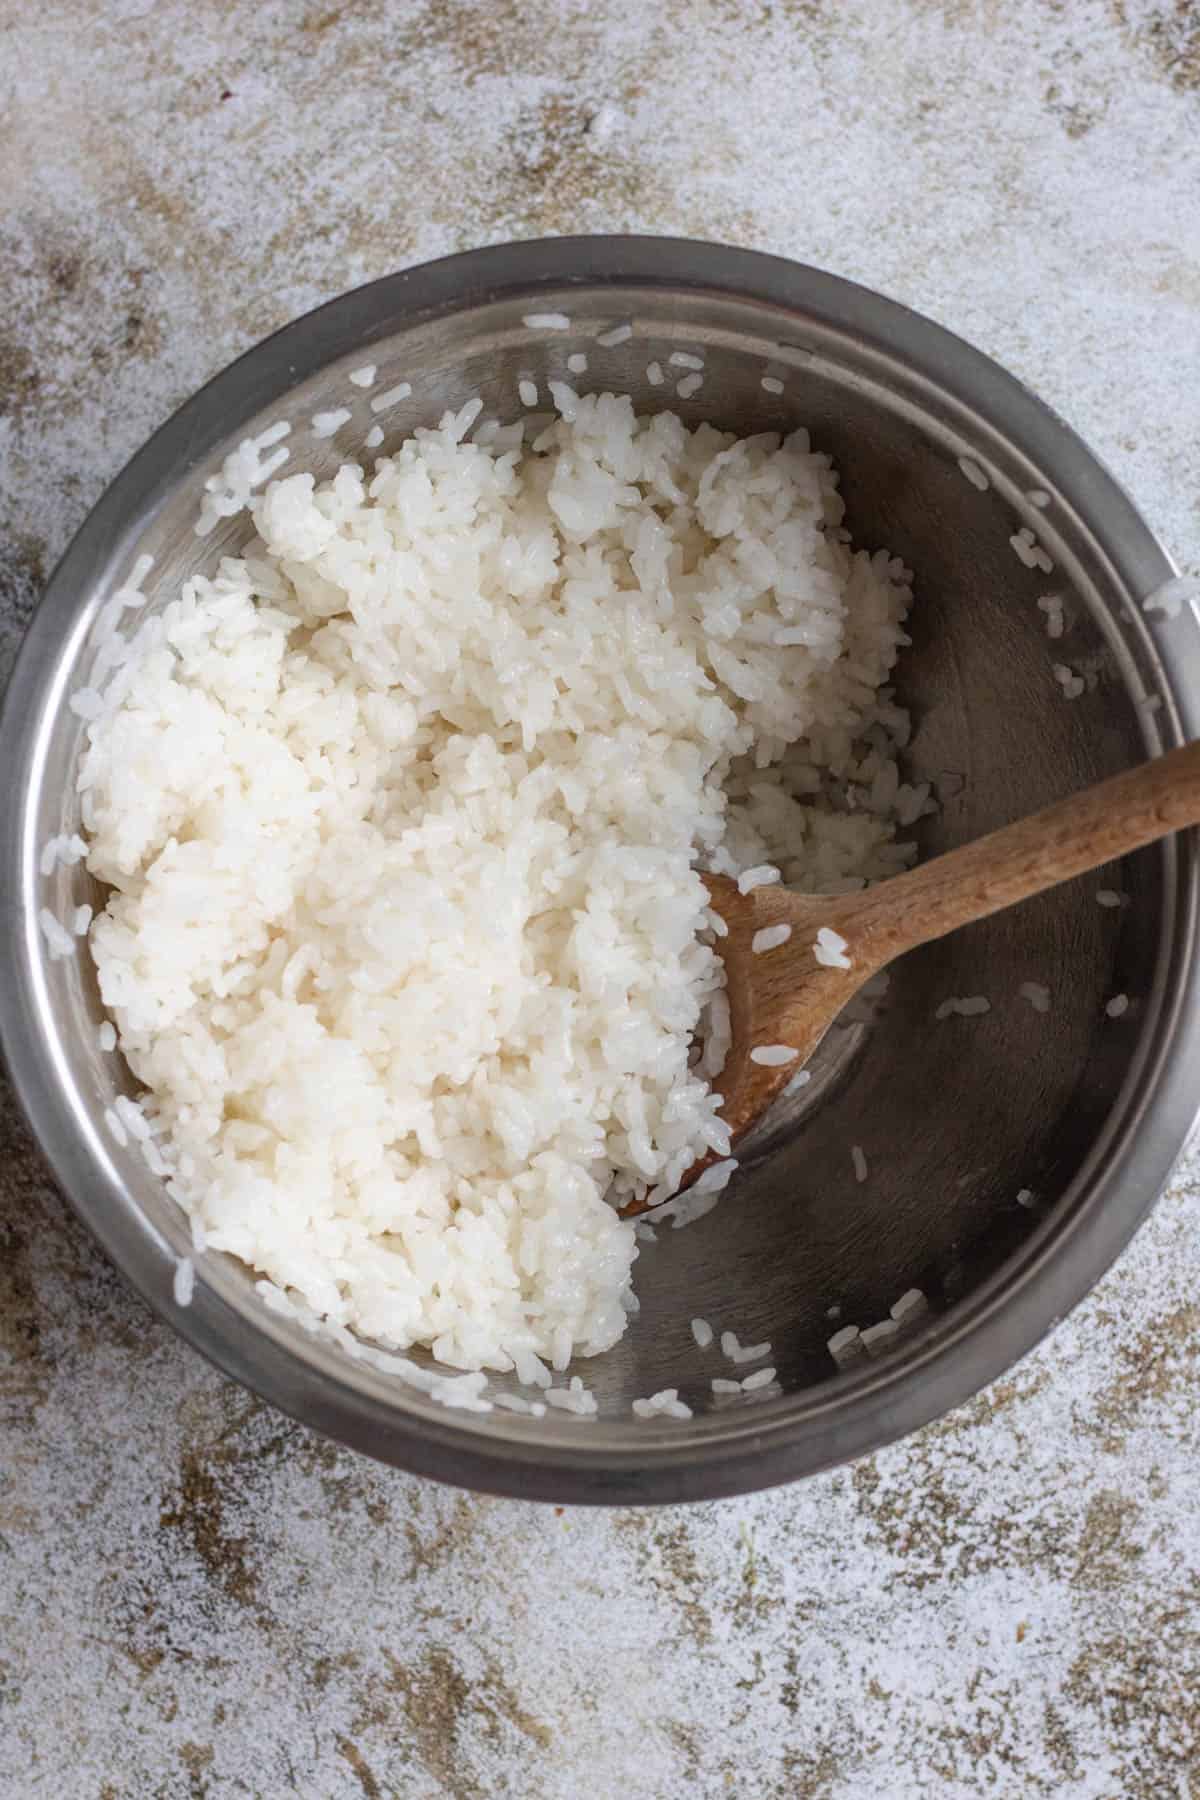 Wooden spoon stirring sugar mixture into the cooked Japanese rice. 